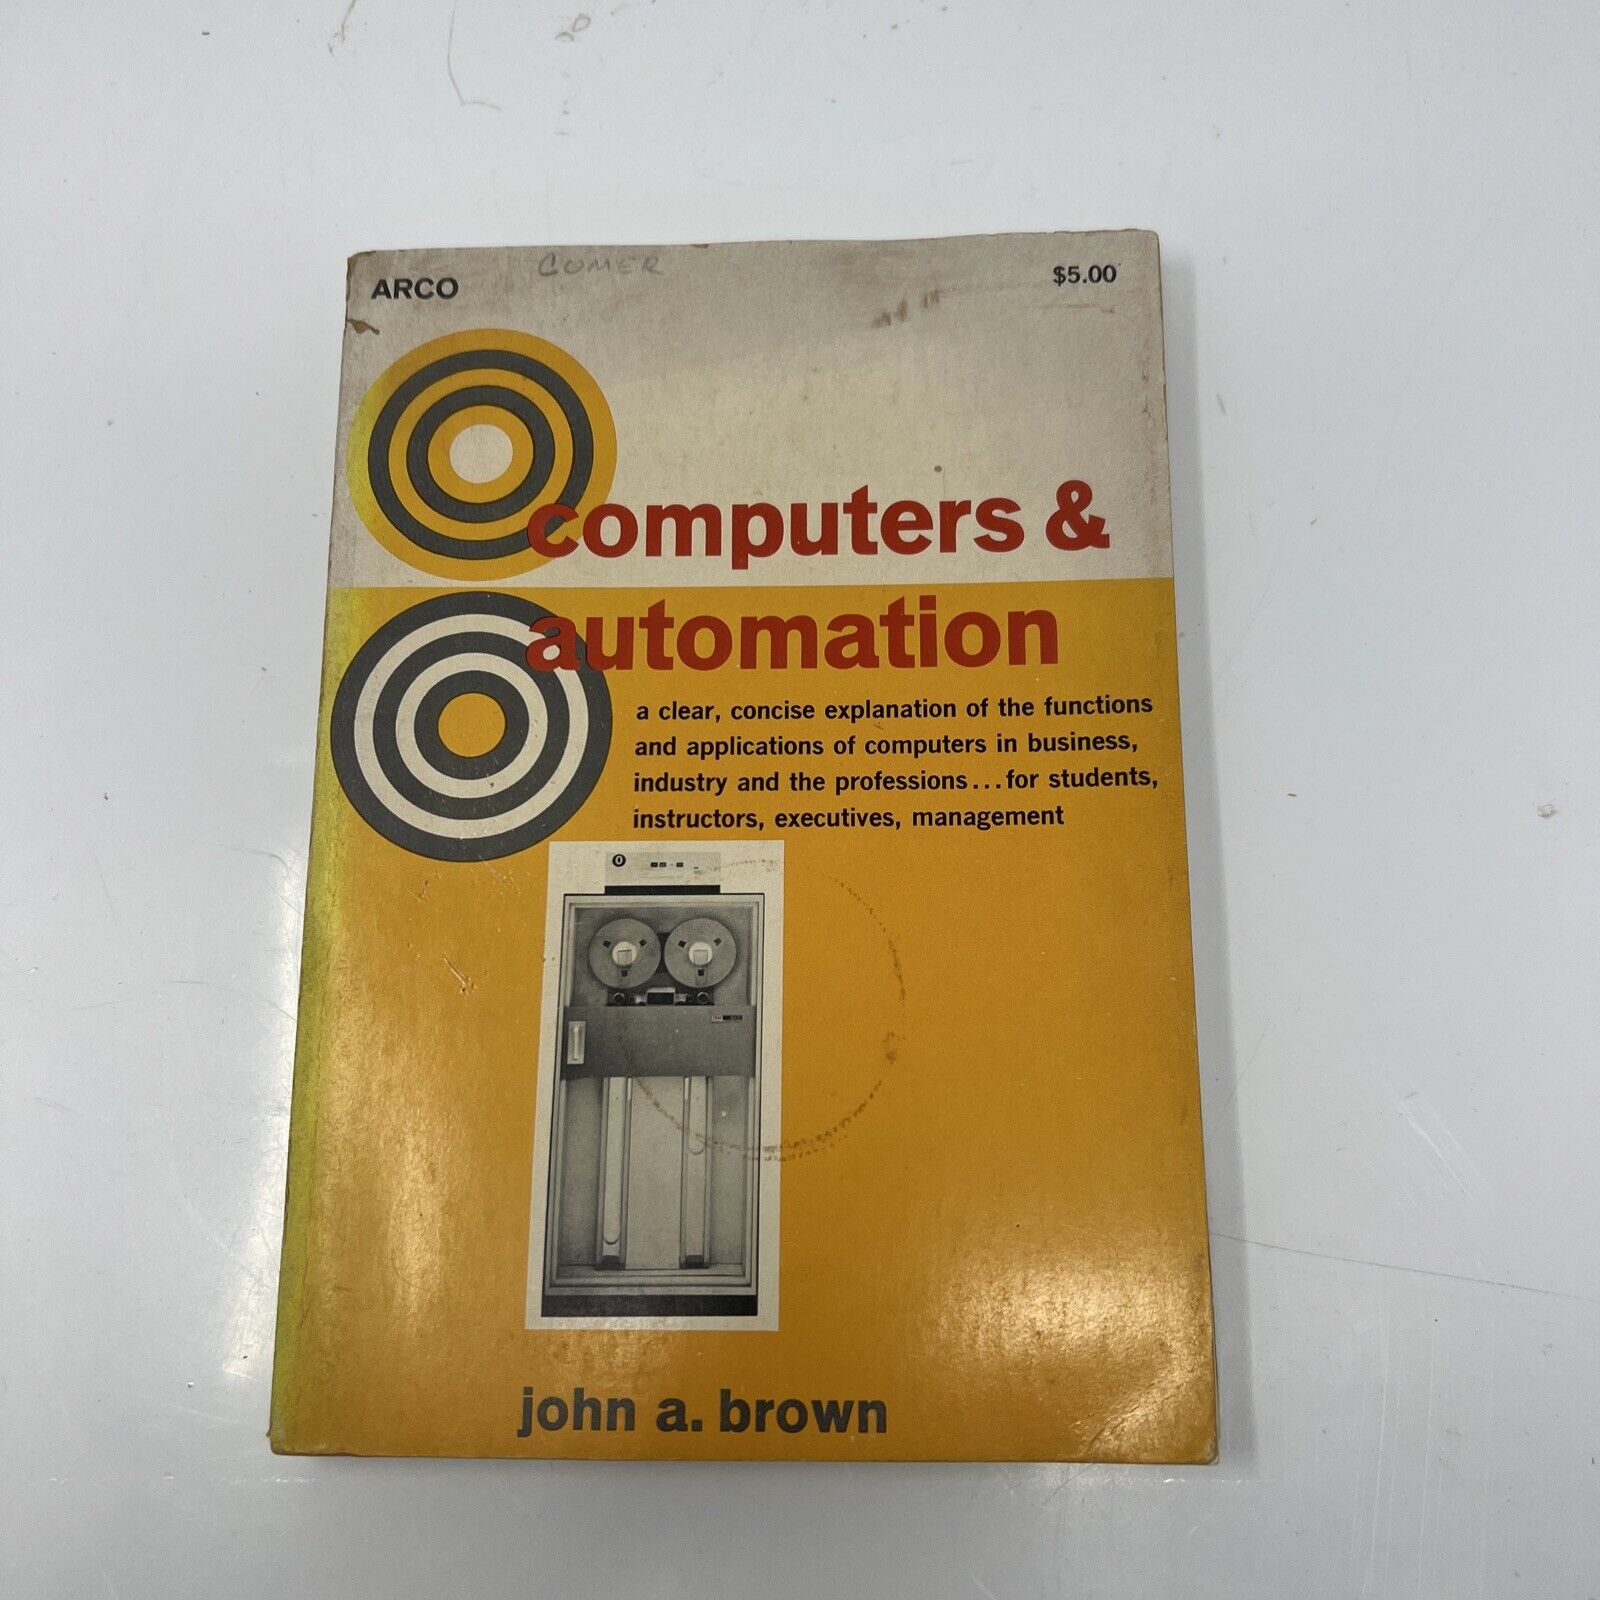 1968 Very Rare Vintage ARCO Computers & Automation John A. Brown Book Instructor